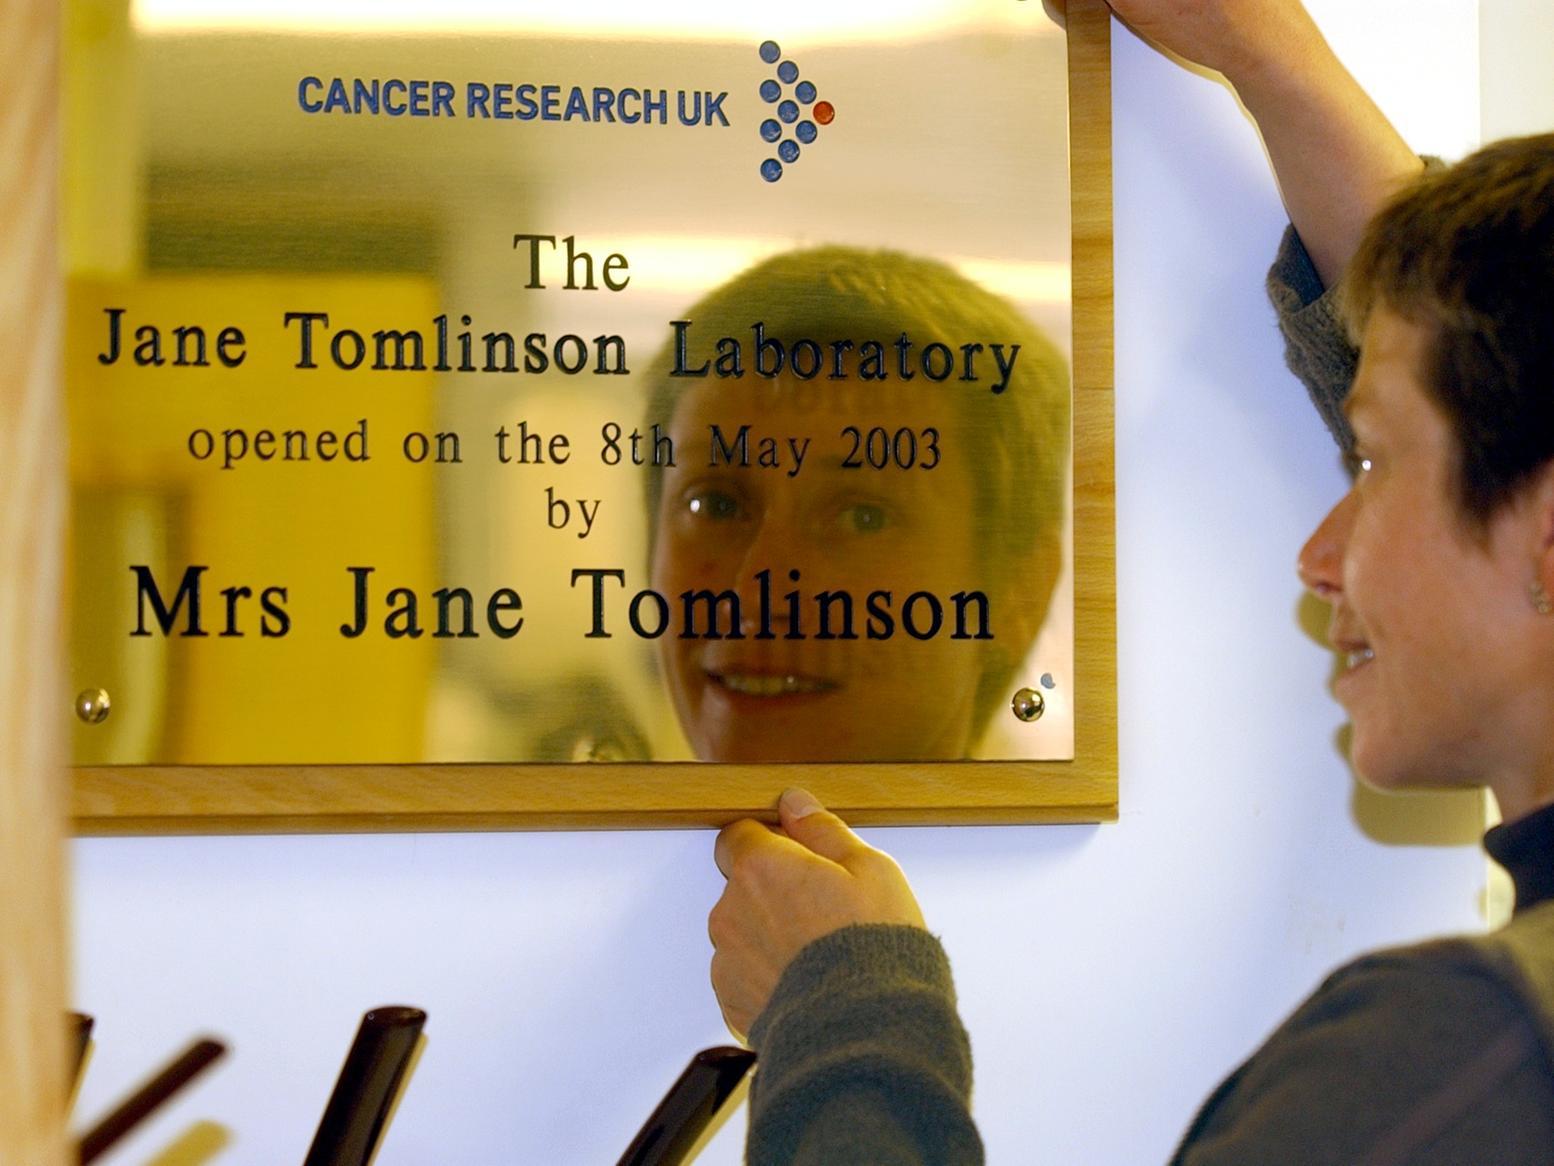 Jane Tomlinson opens Cancer Research UK's The Jane Tomlinson Laboratory at St James's Hospital.